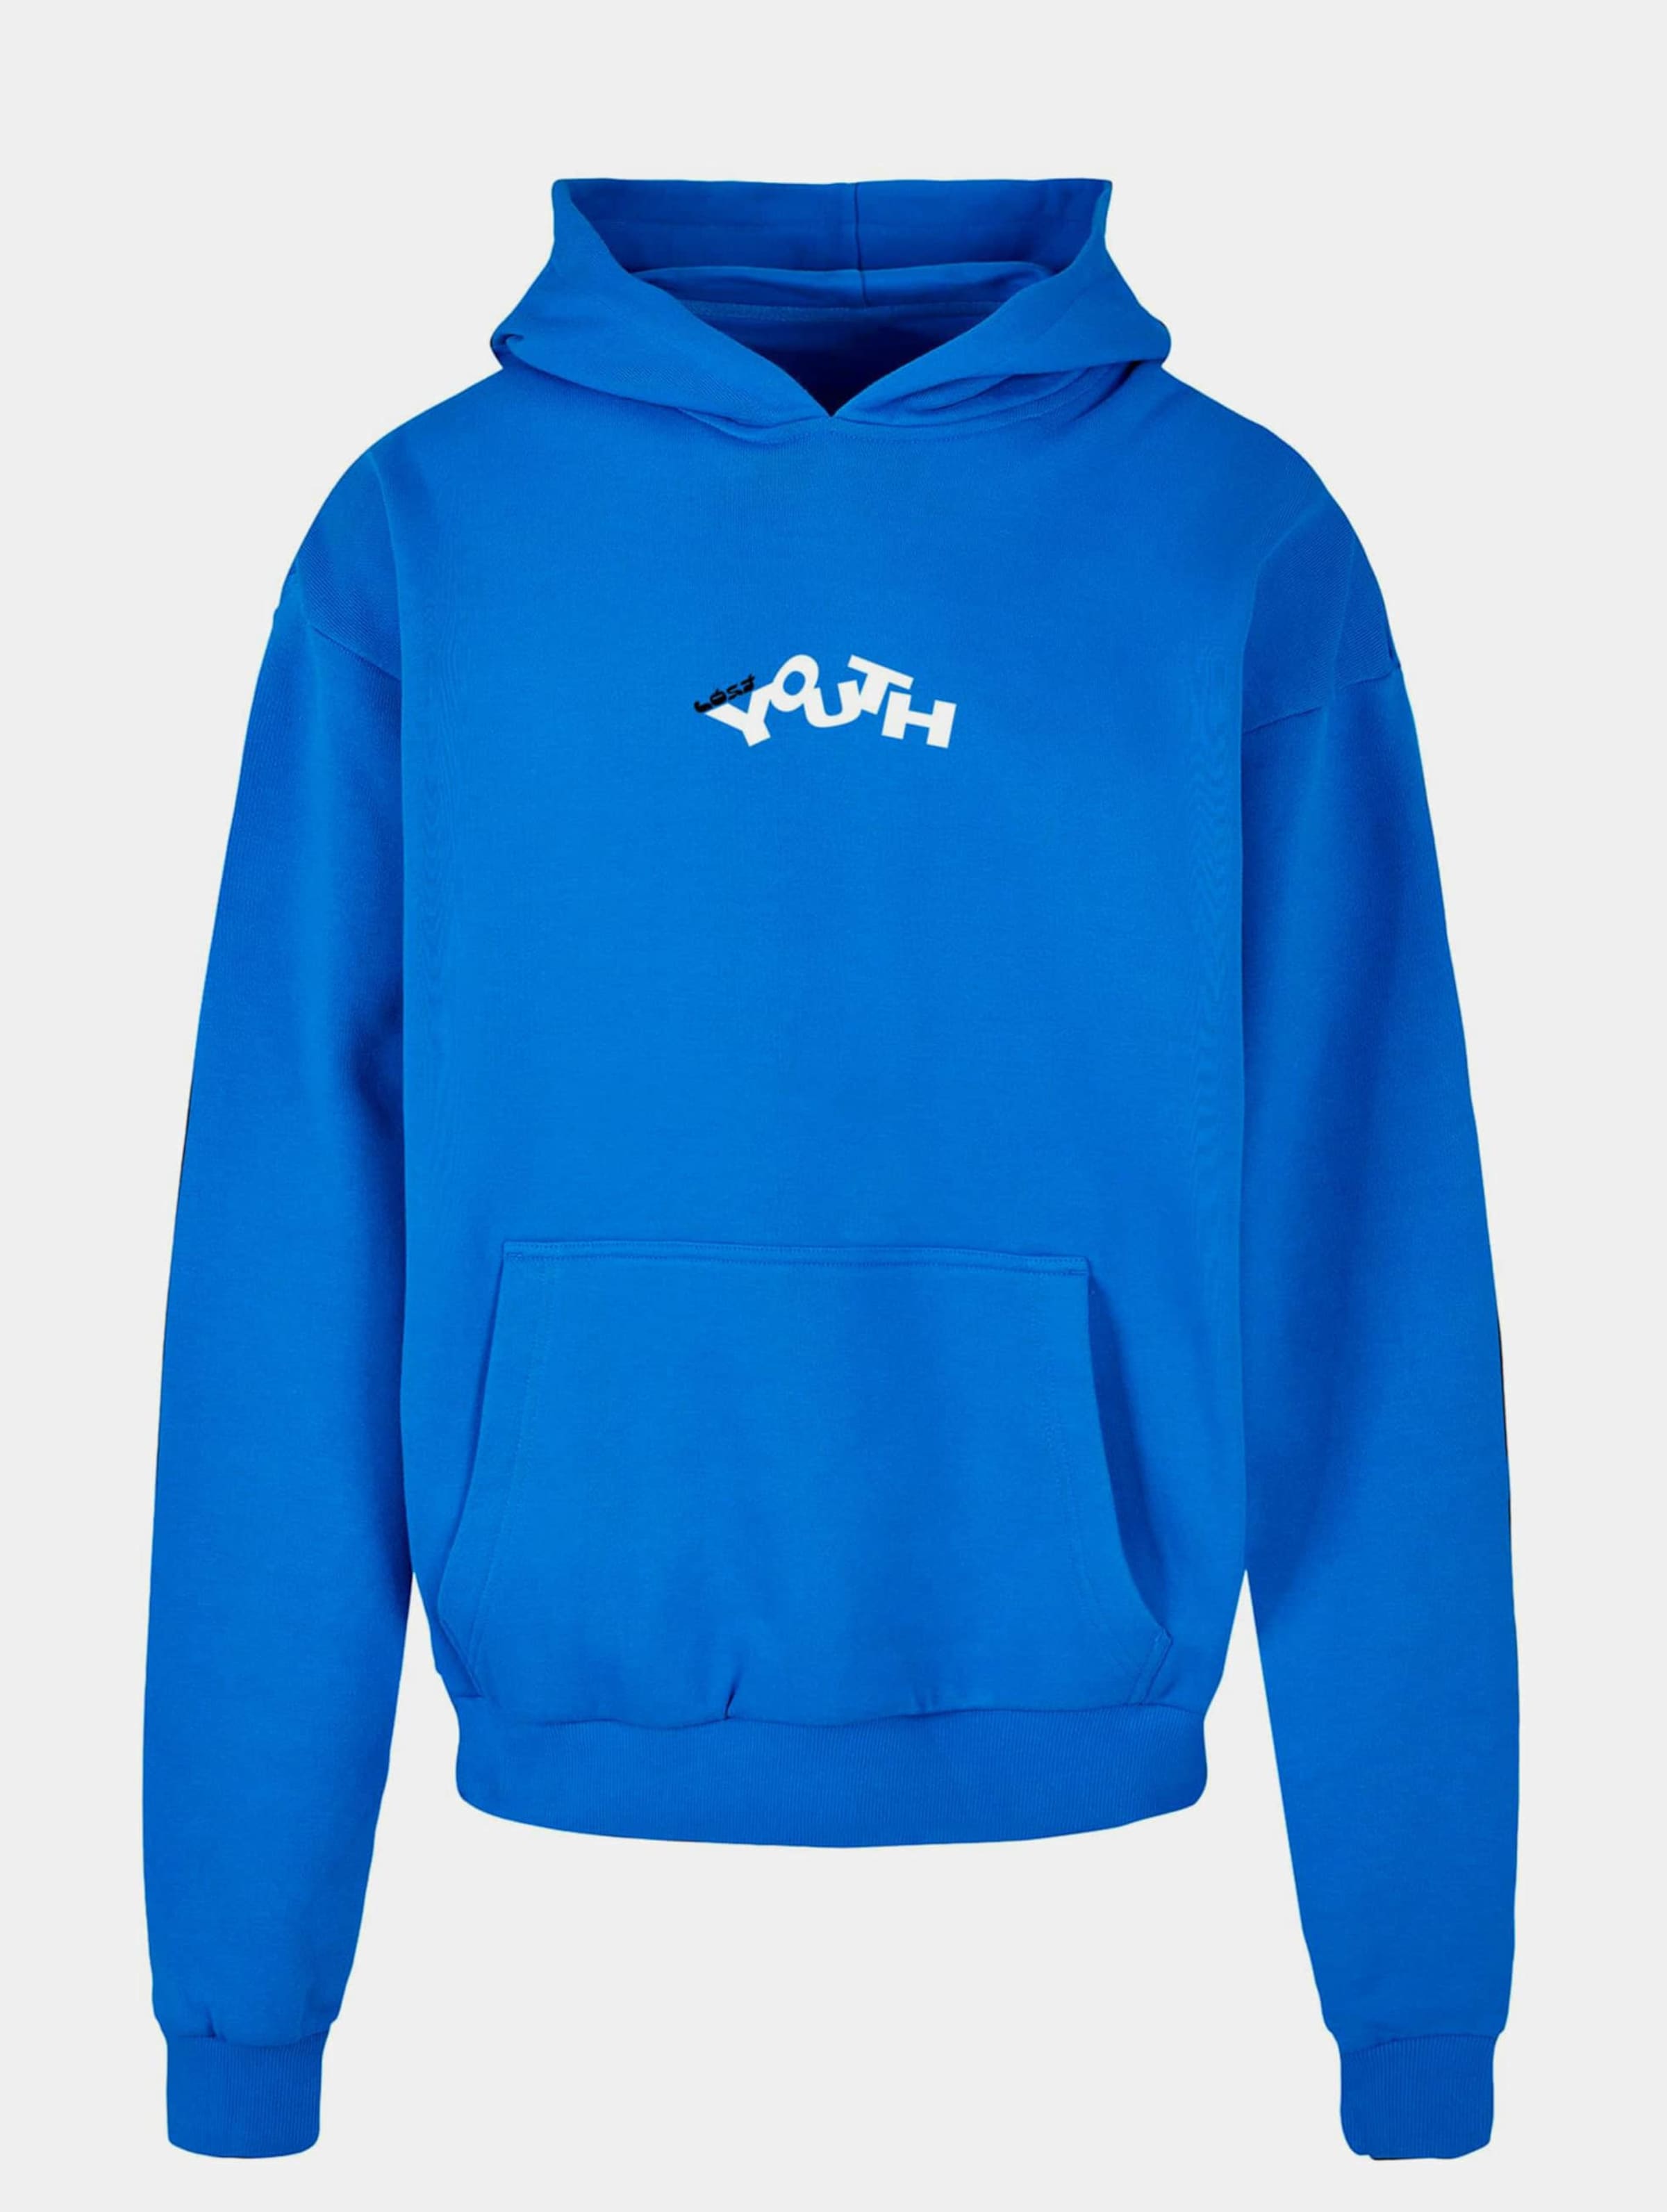 Lost Youth LY HOODIE ''YOUTH'' Mannen op kleur blauw, Maat XL